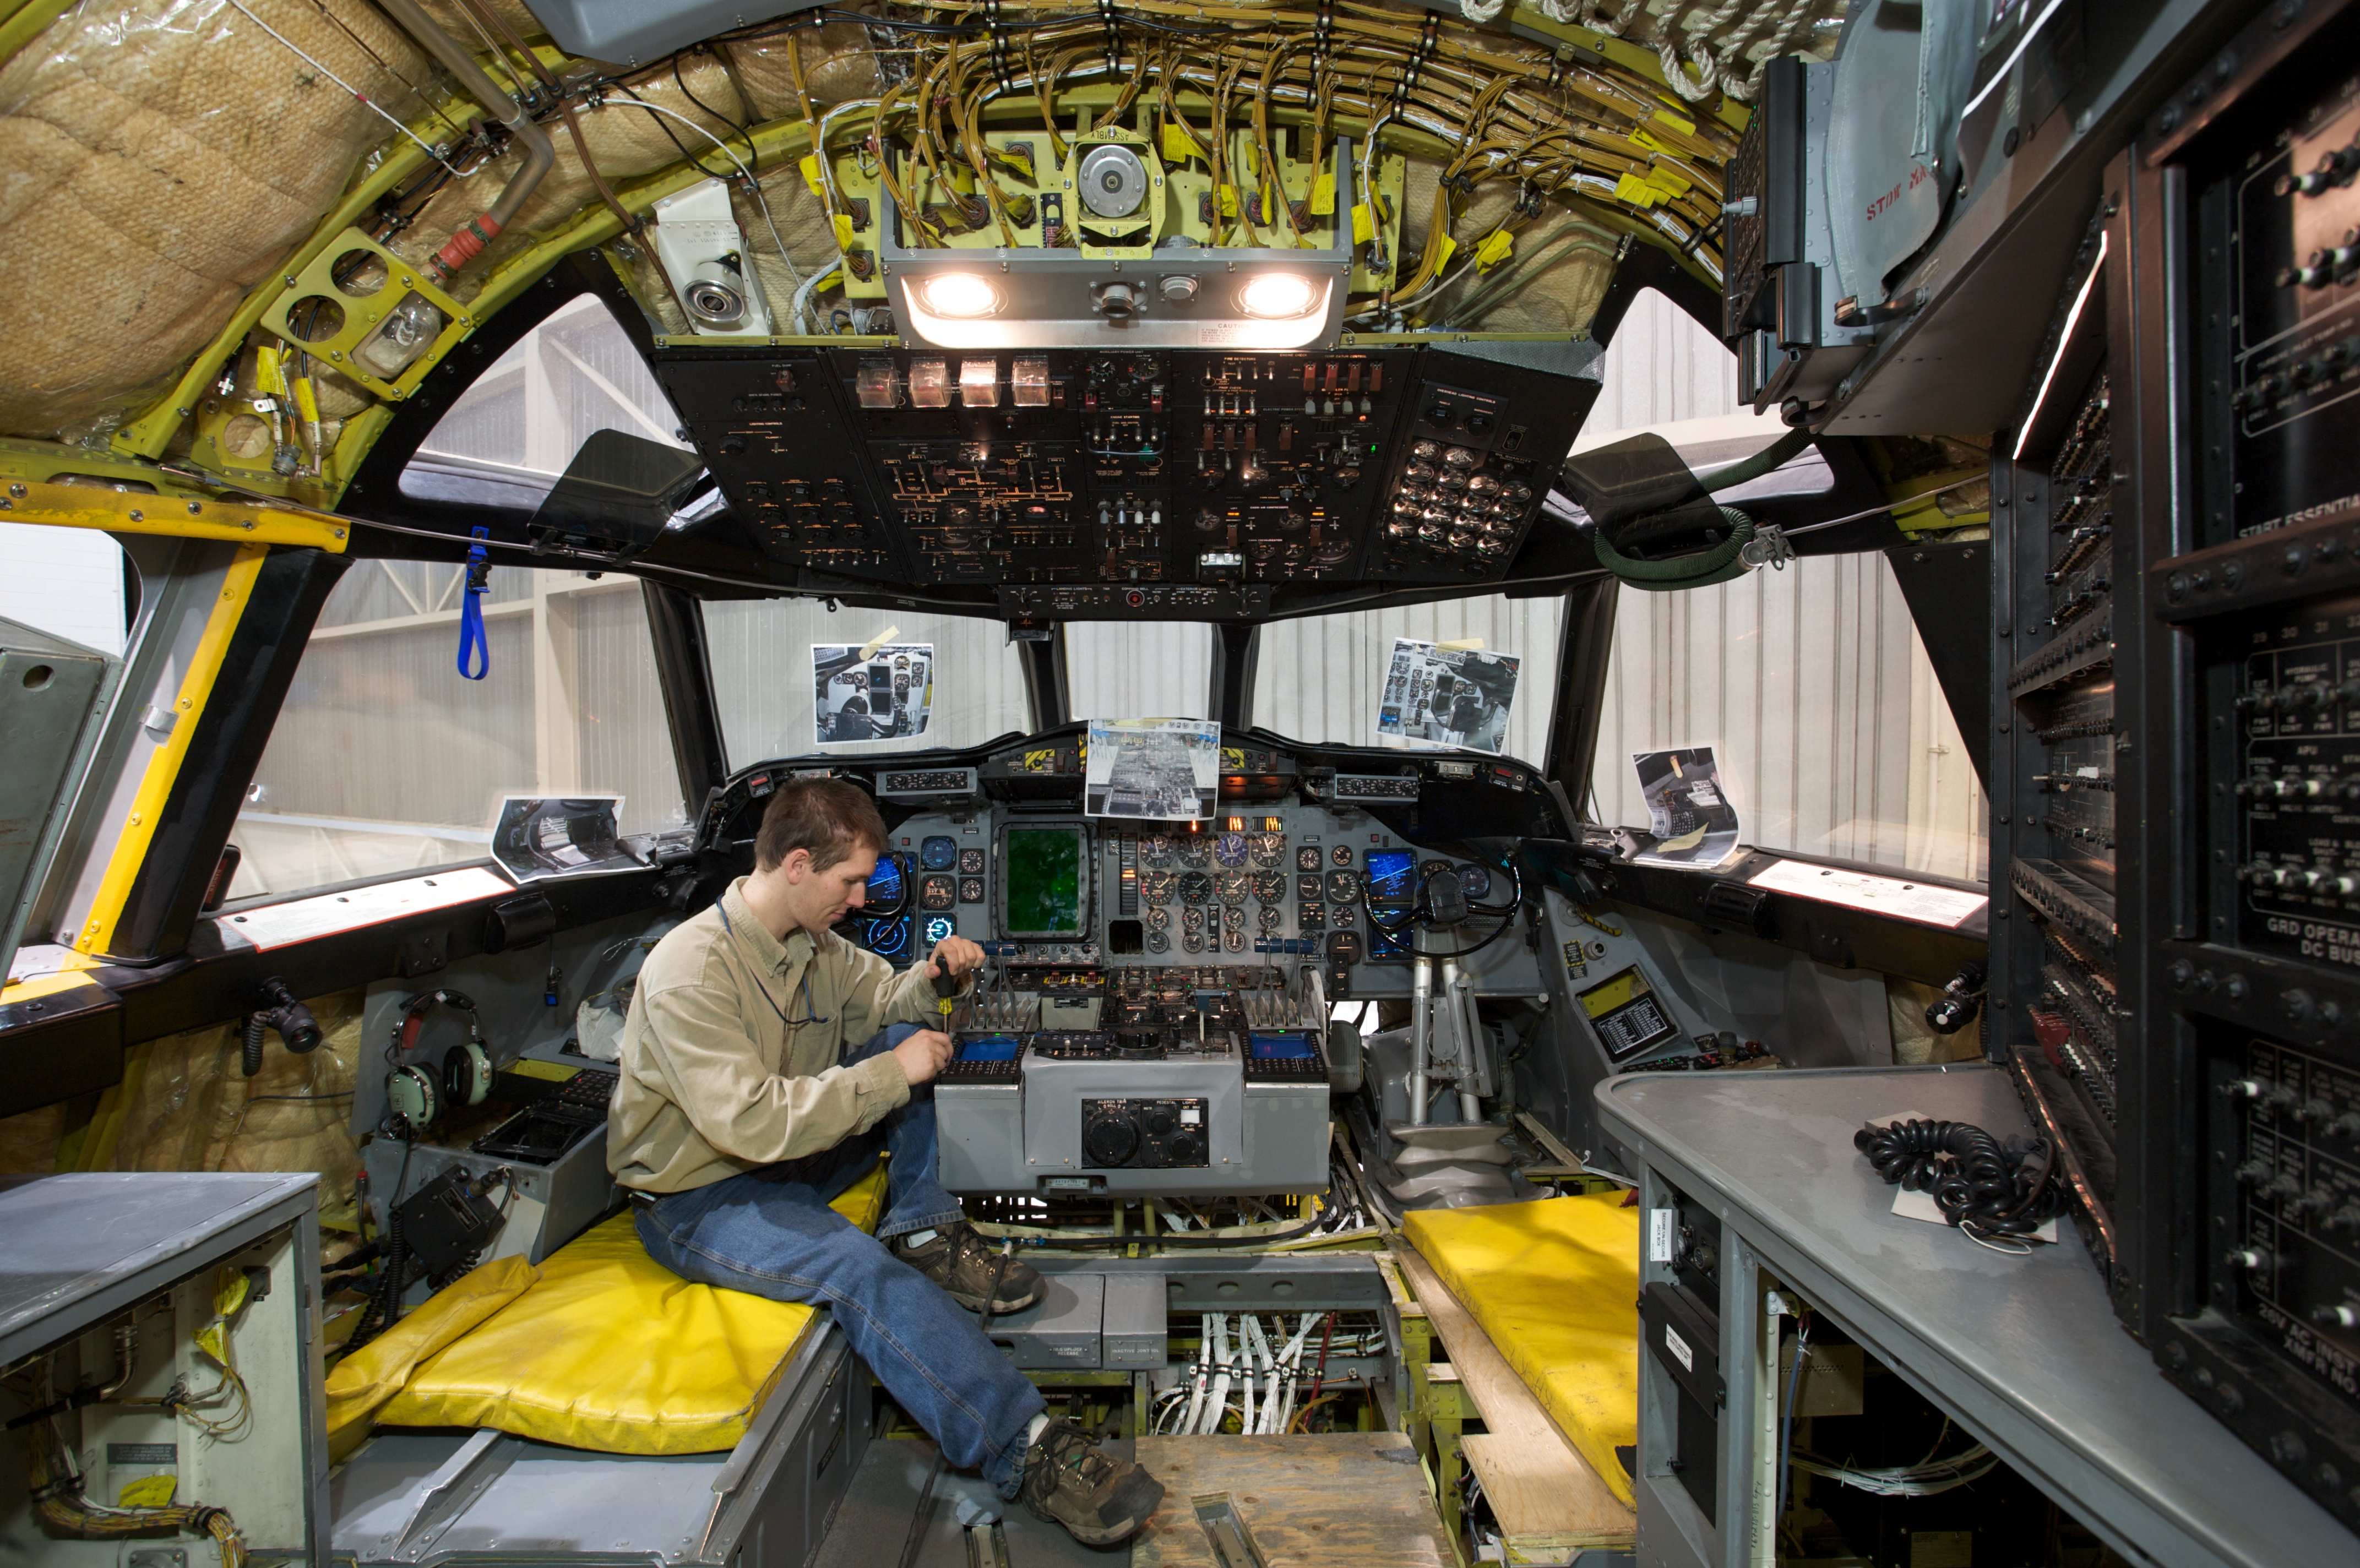 Aerospace Engineer working on the inside of an aircraft